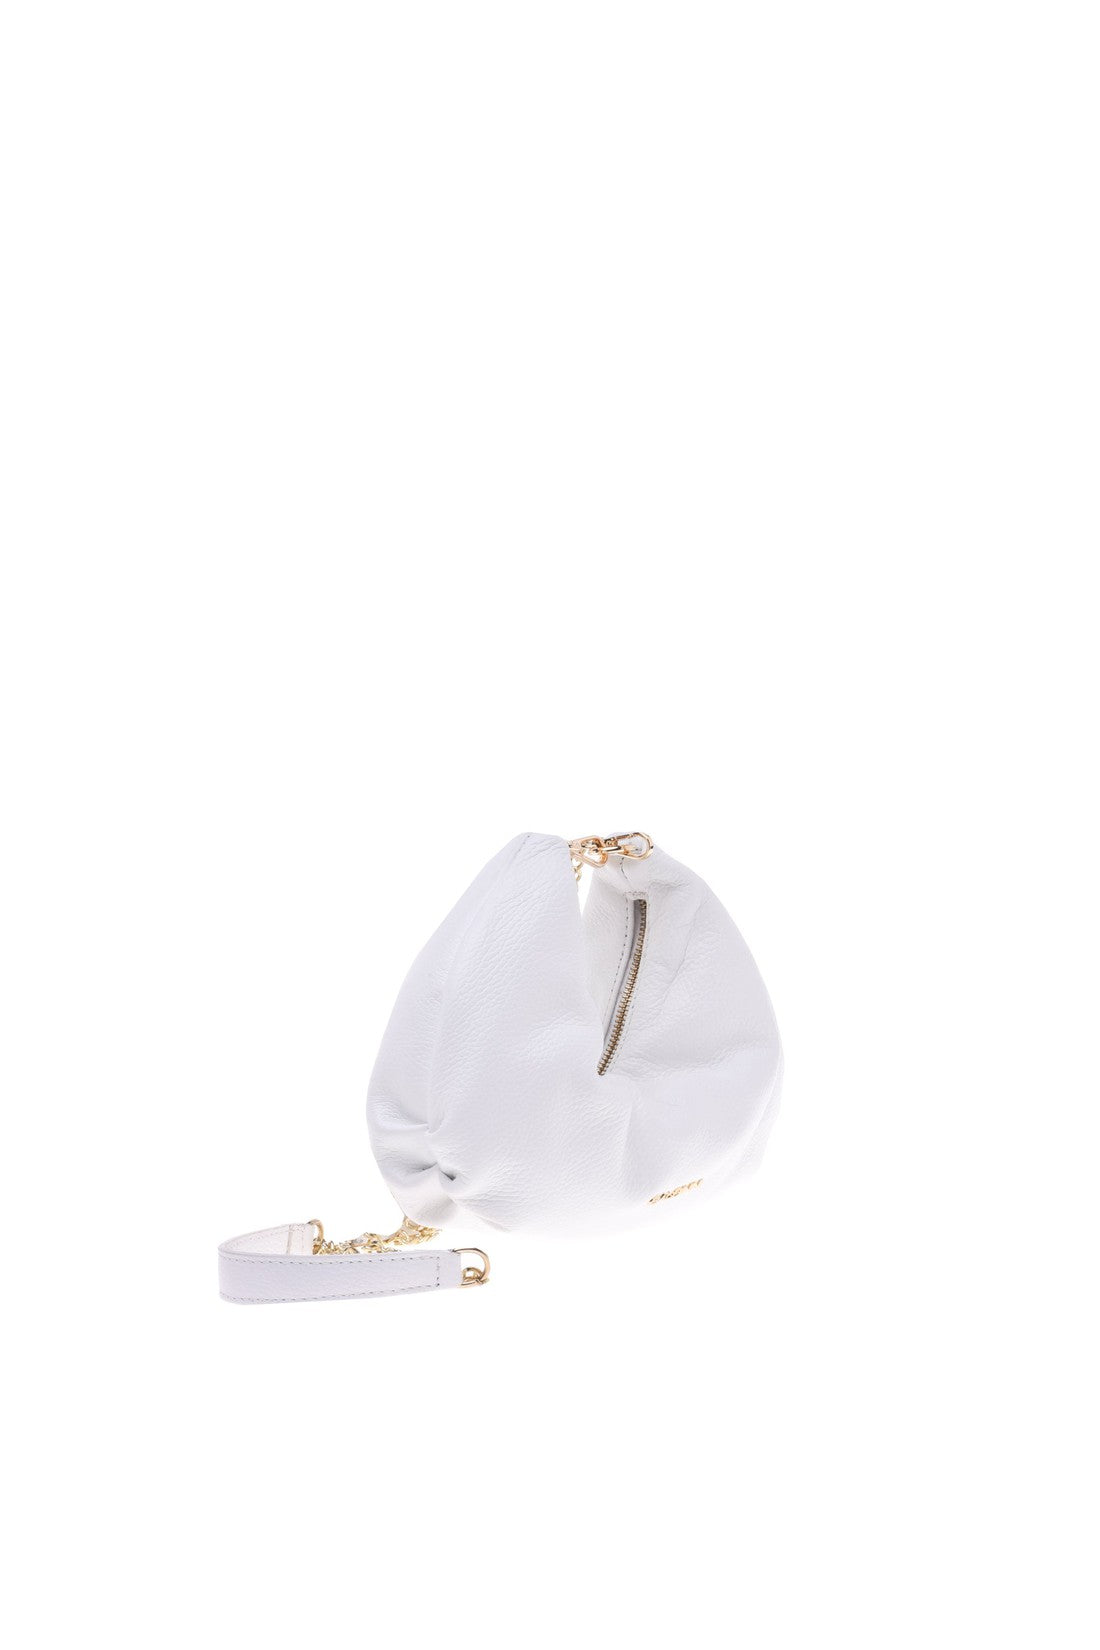 Clutch bag in white tumbled leather